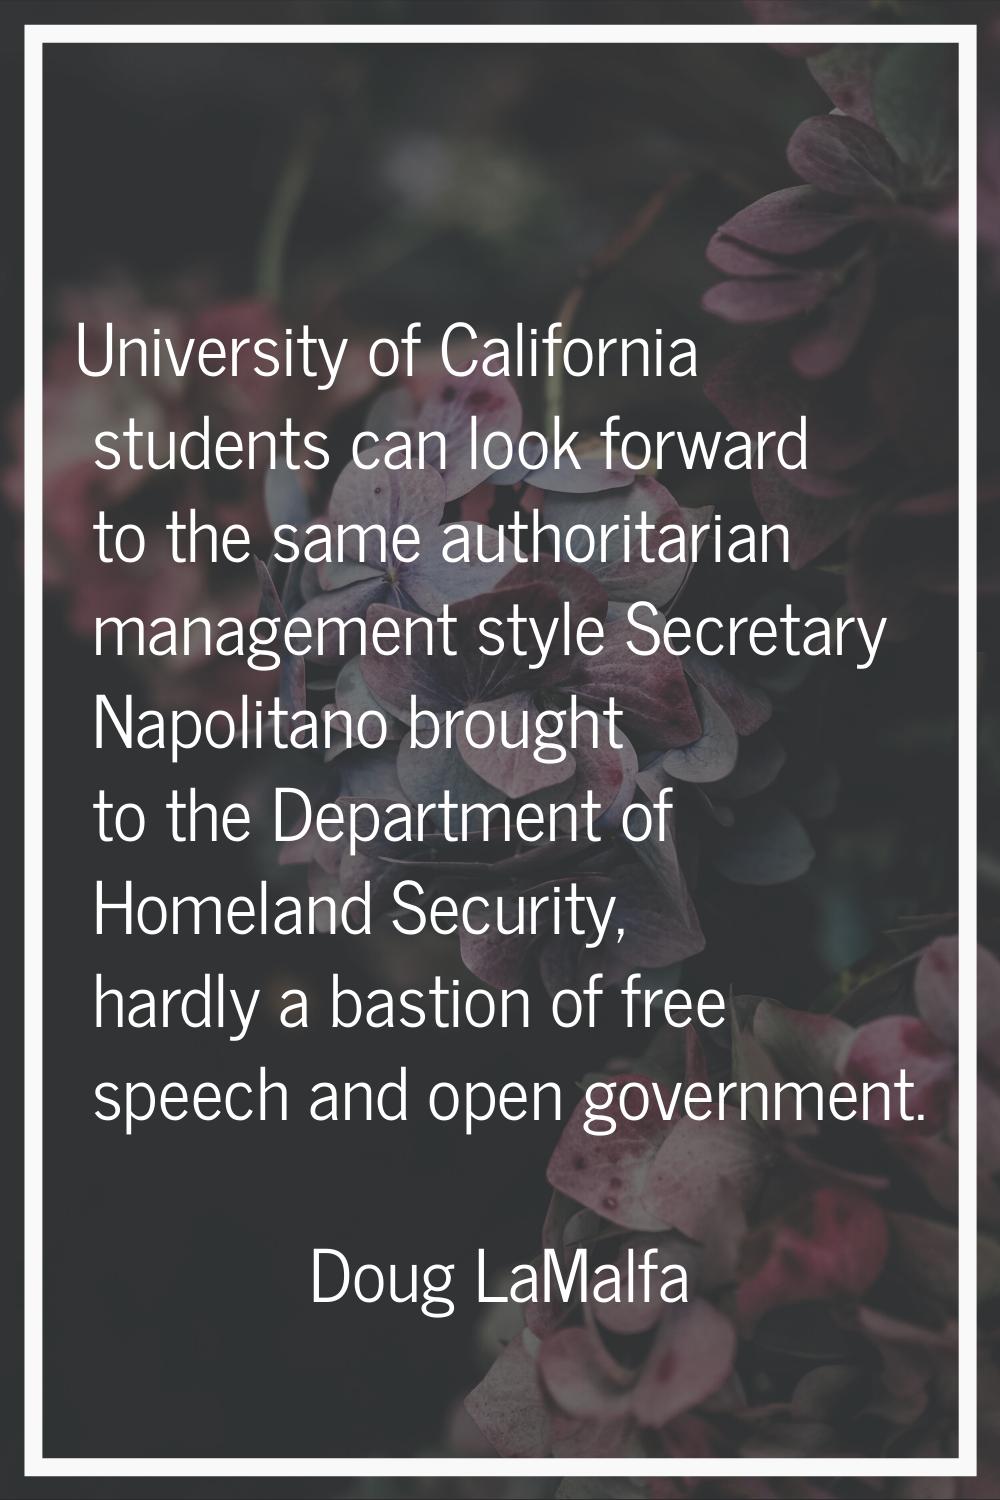 University of California students can look forward to the same authoritarian management style Secre